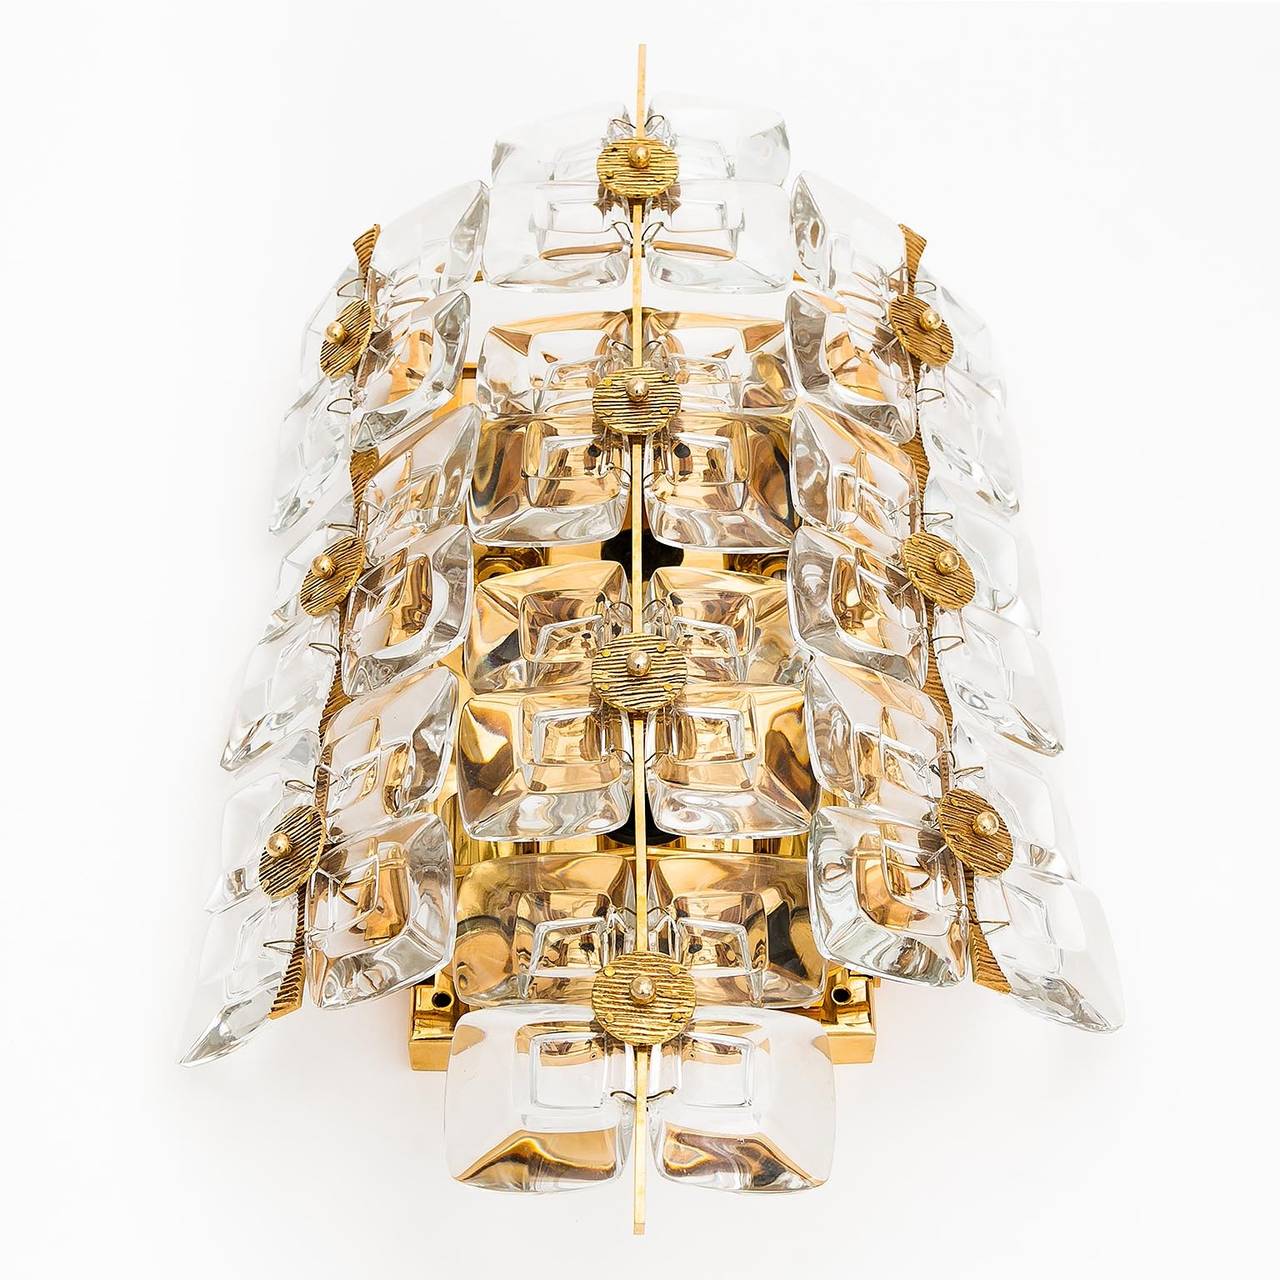 A large, high quality and impressive sconce by Palwa, Germany, manufactured in Mid-Century, cira 1970 (late 1960s or early 1970s).
It is made of a gilded brass frame with square lens glass pieces and gold/bronze elements. 
The lamp has six small